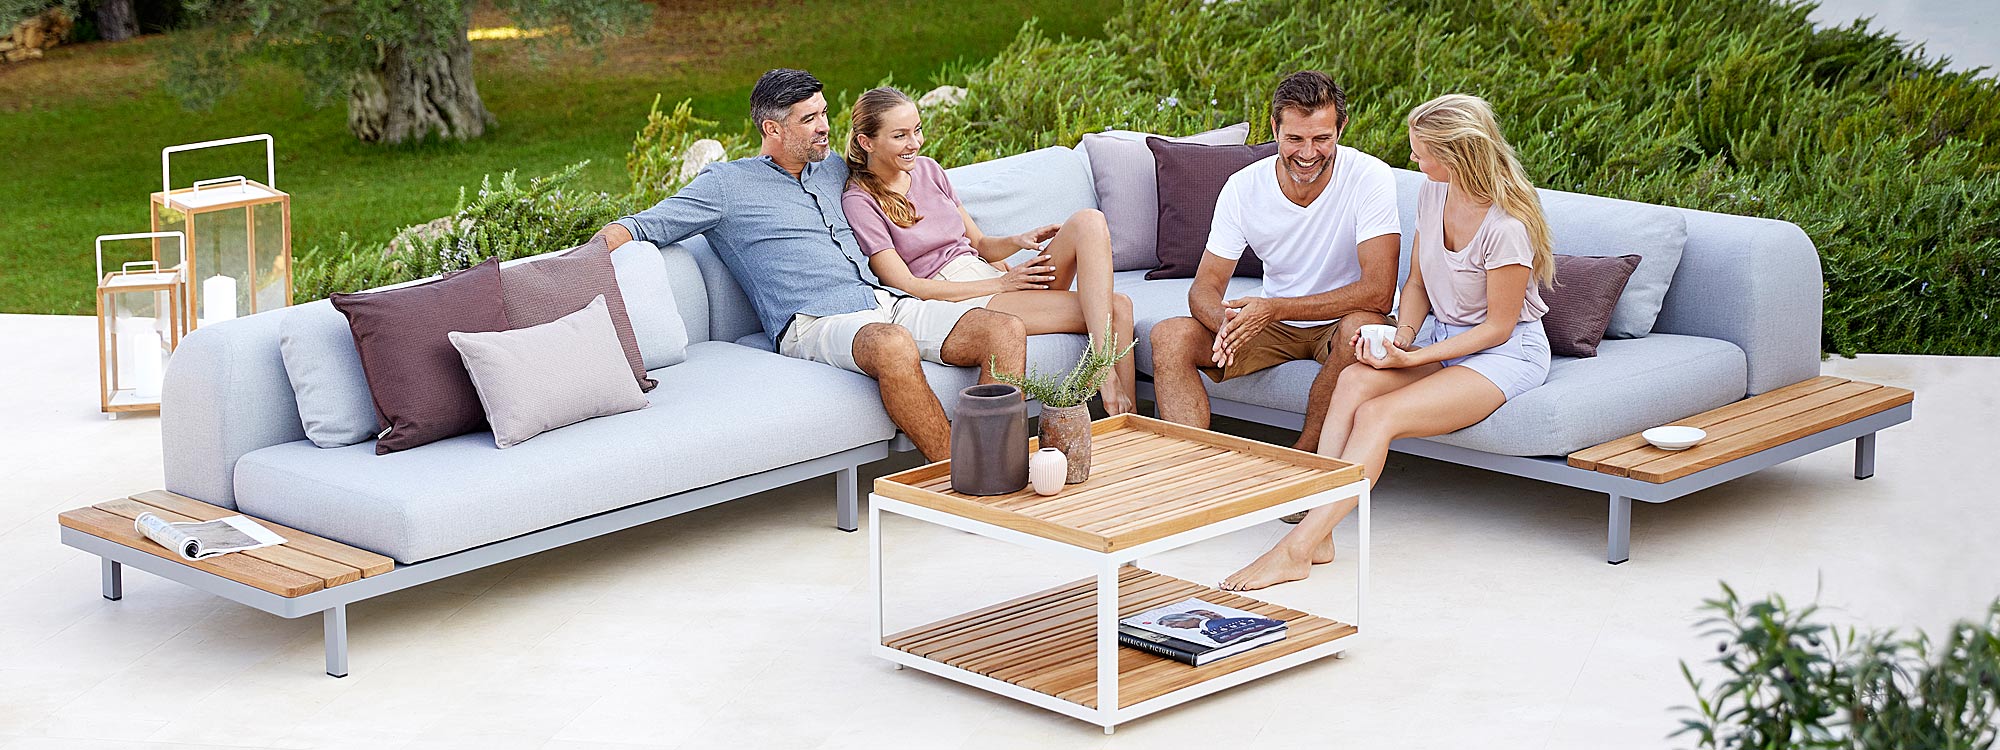 Image of 2 couples sat on Space modern corner sofa in light grey with Level teak low table in centre, by Cane-line